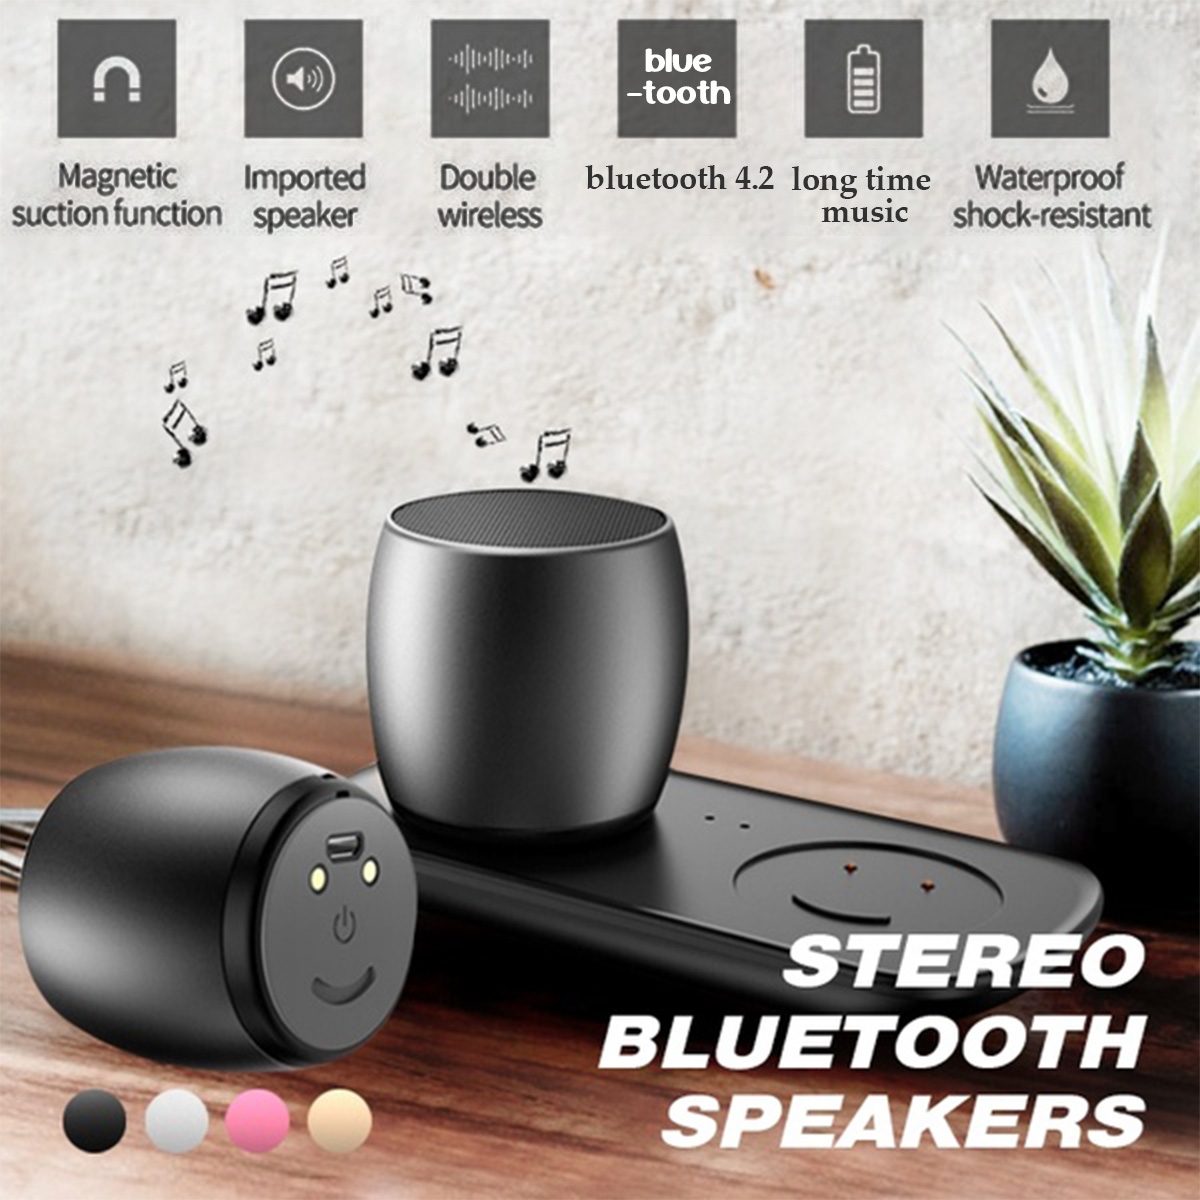 3W 400mAh Waterproof Wireless Stereo Twins Bluetooth Speaker with USB Charging Dock for Car Home